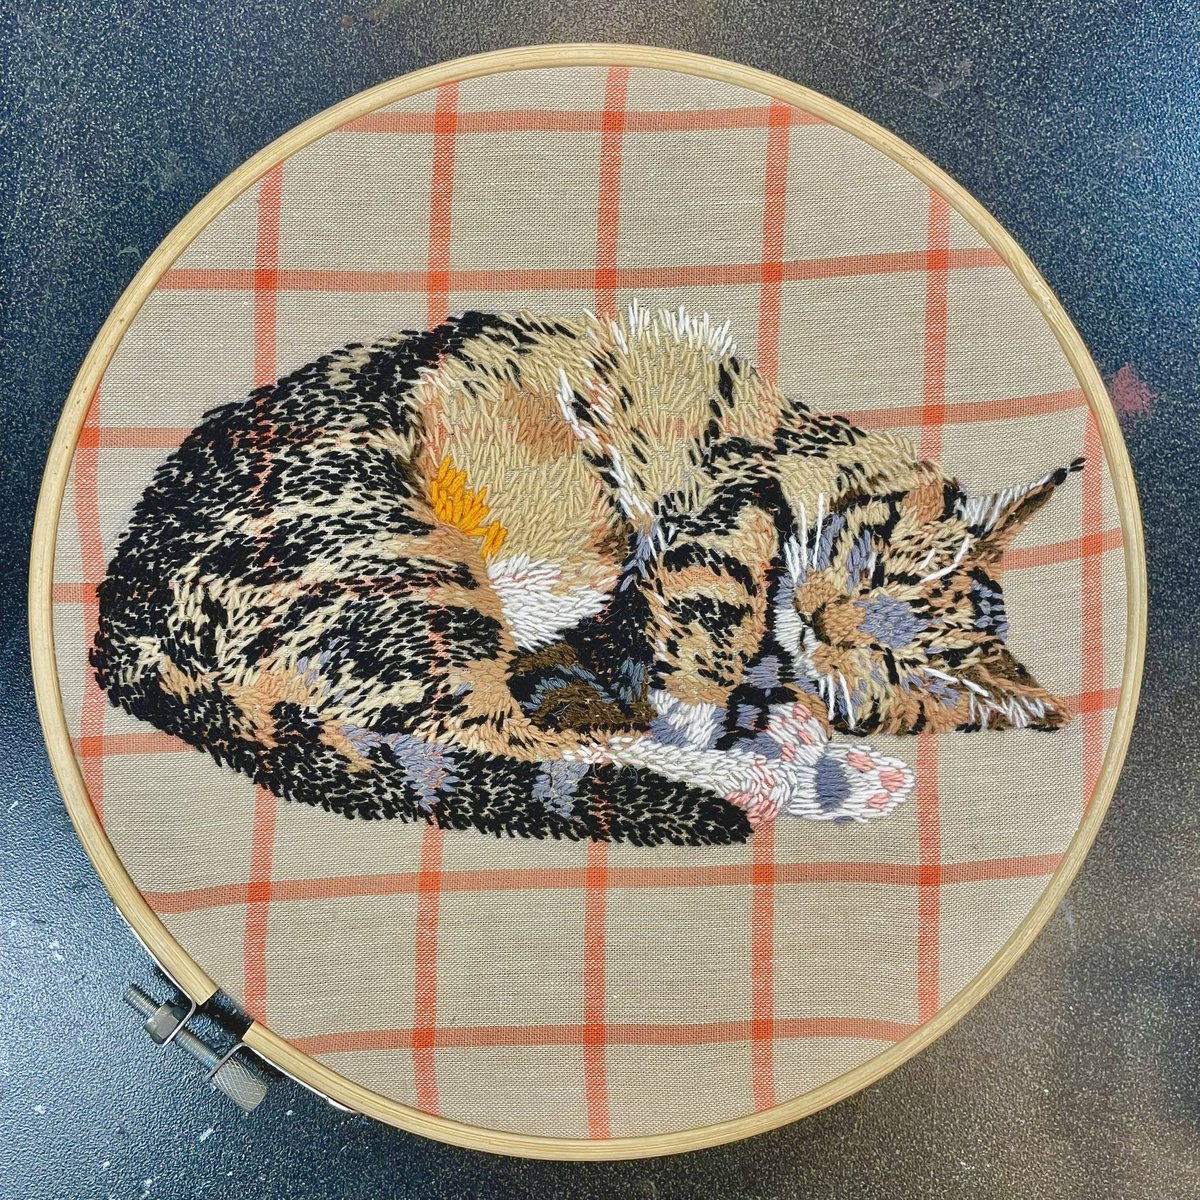 Hand embroidery of my cat